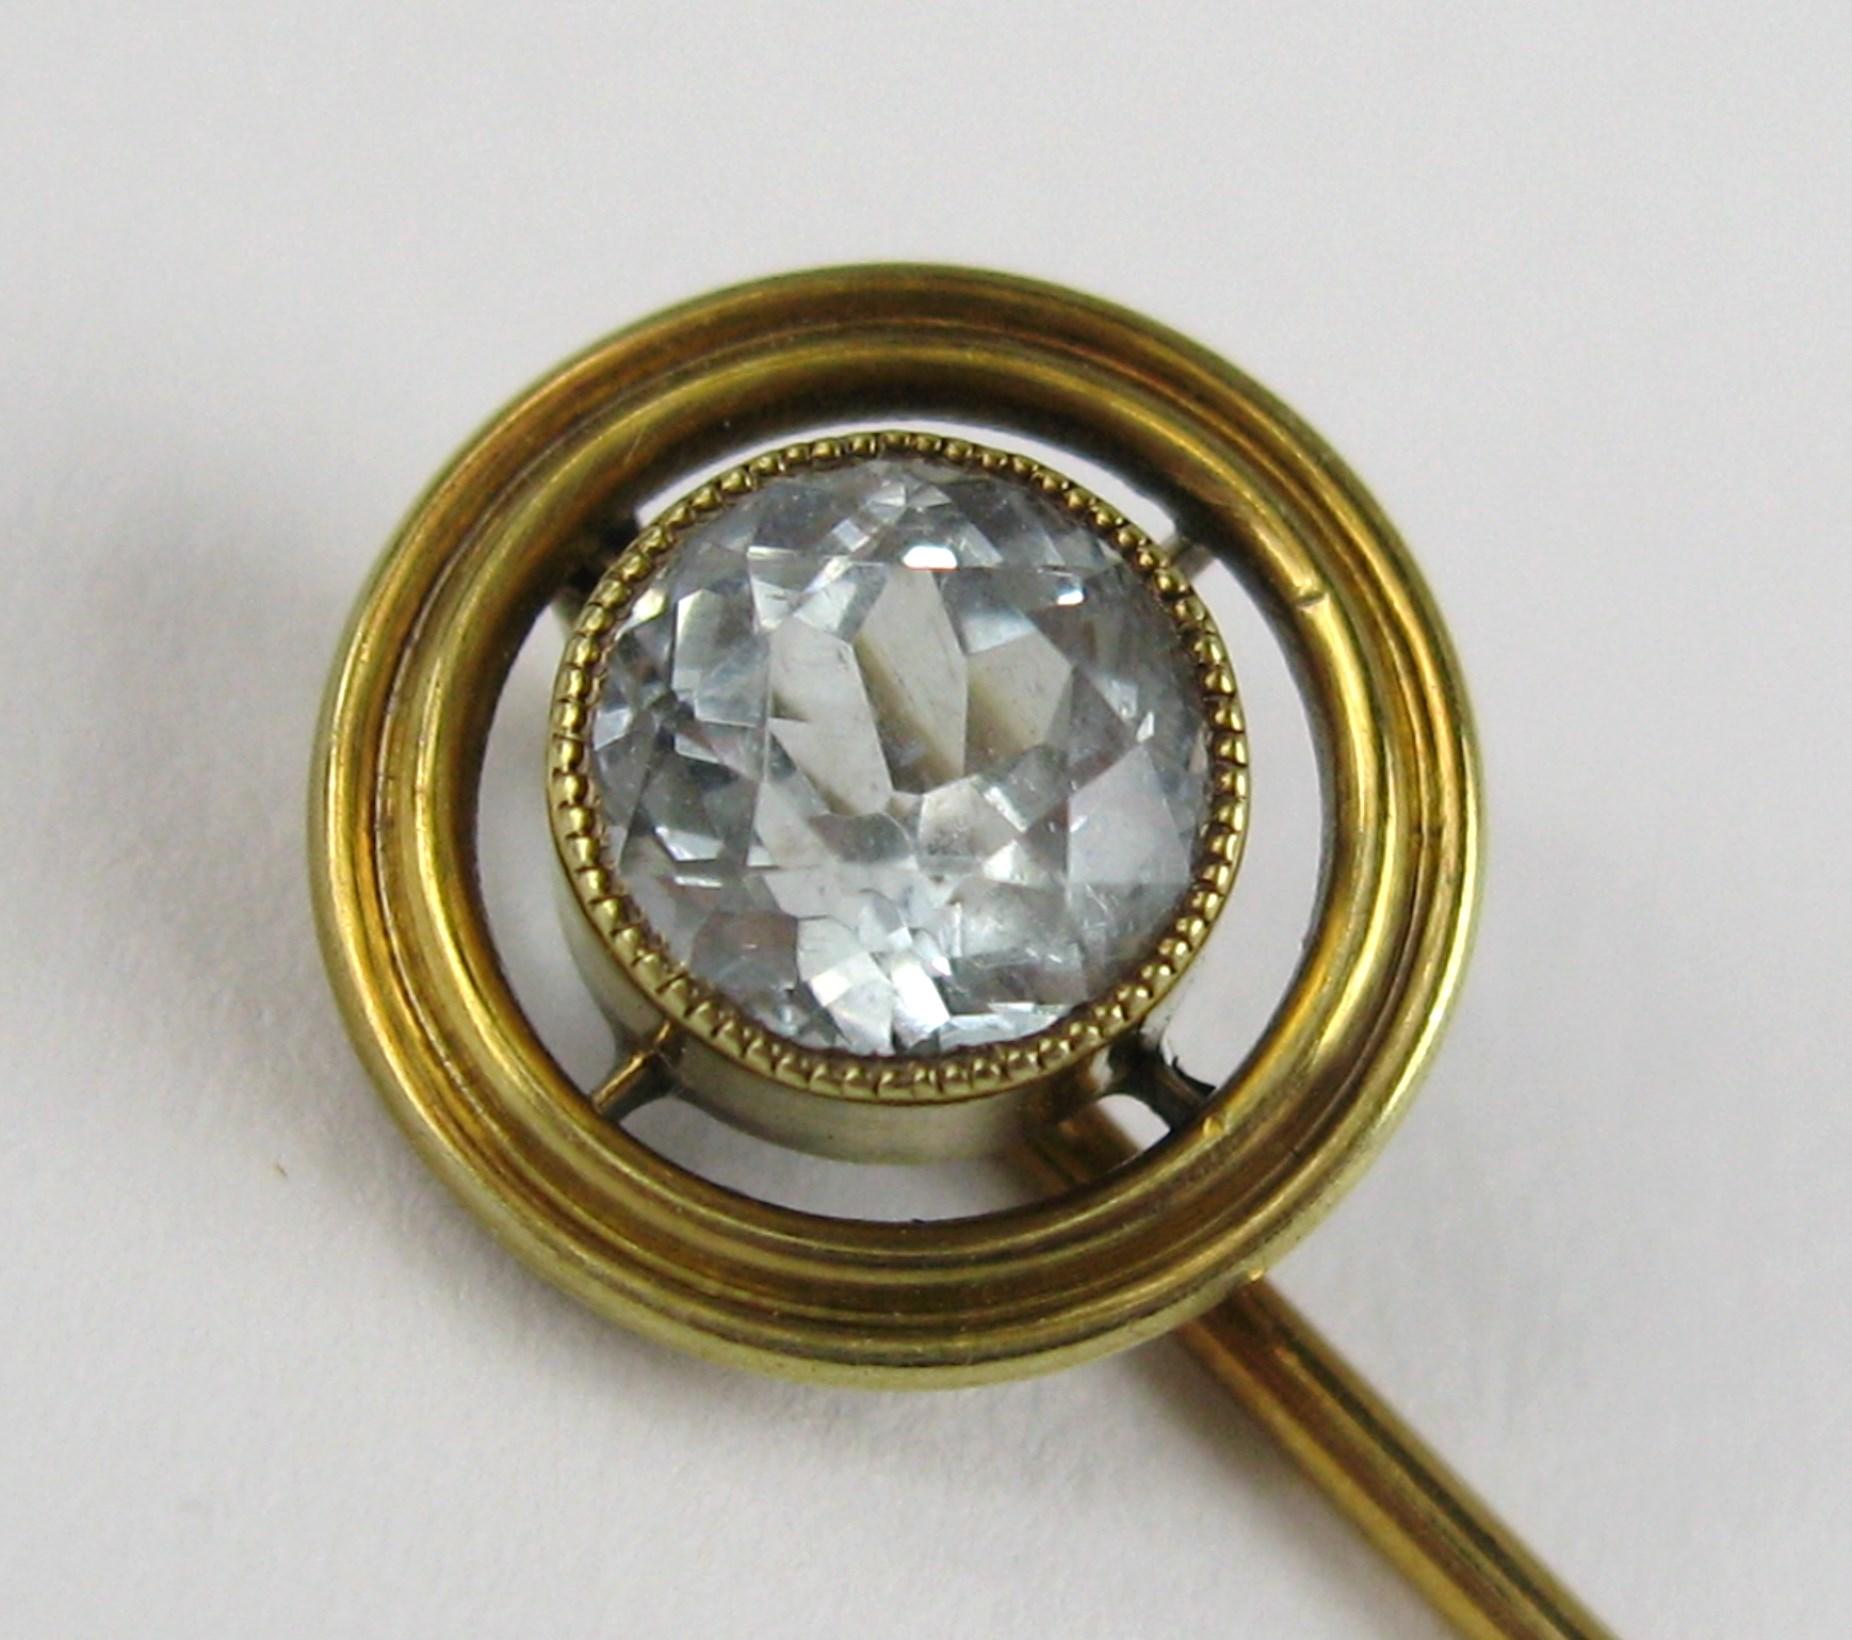 Lovely 14K Gold Aquamarine Stick Pin. Aquamarine measuring 6.6mm inside a gold setting. Outside Gold circle is .44in. Stick measures 2.72 in.  This is out of a massive collection of Contemporary designer & Vintage clothing as well as Hopi, Zuni,